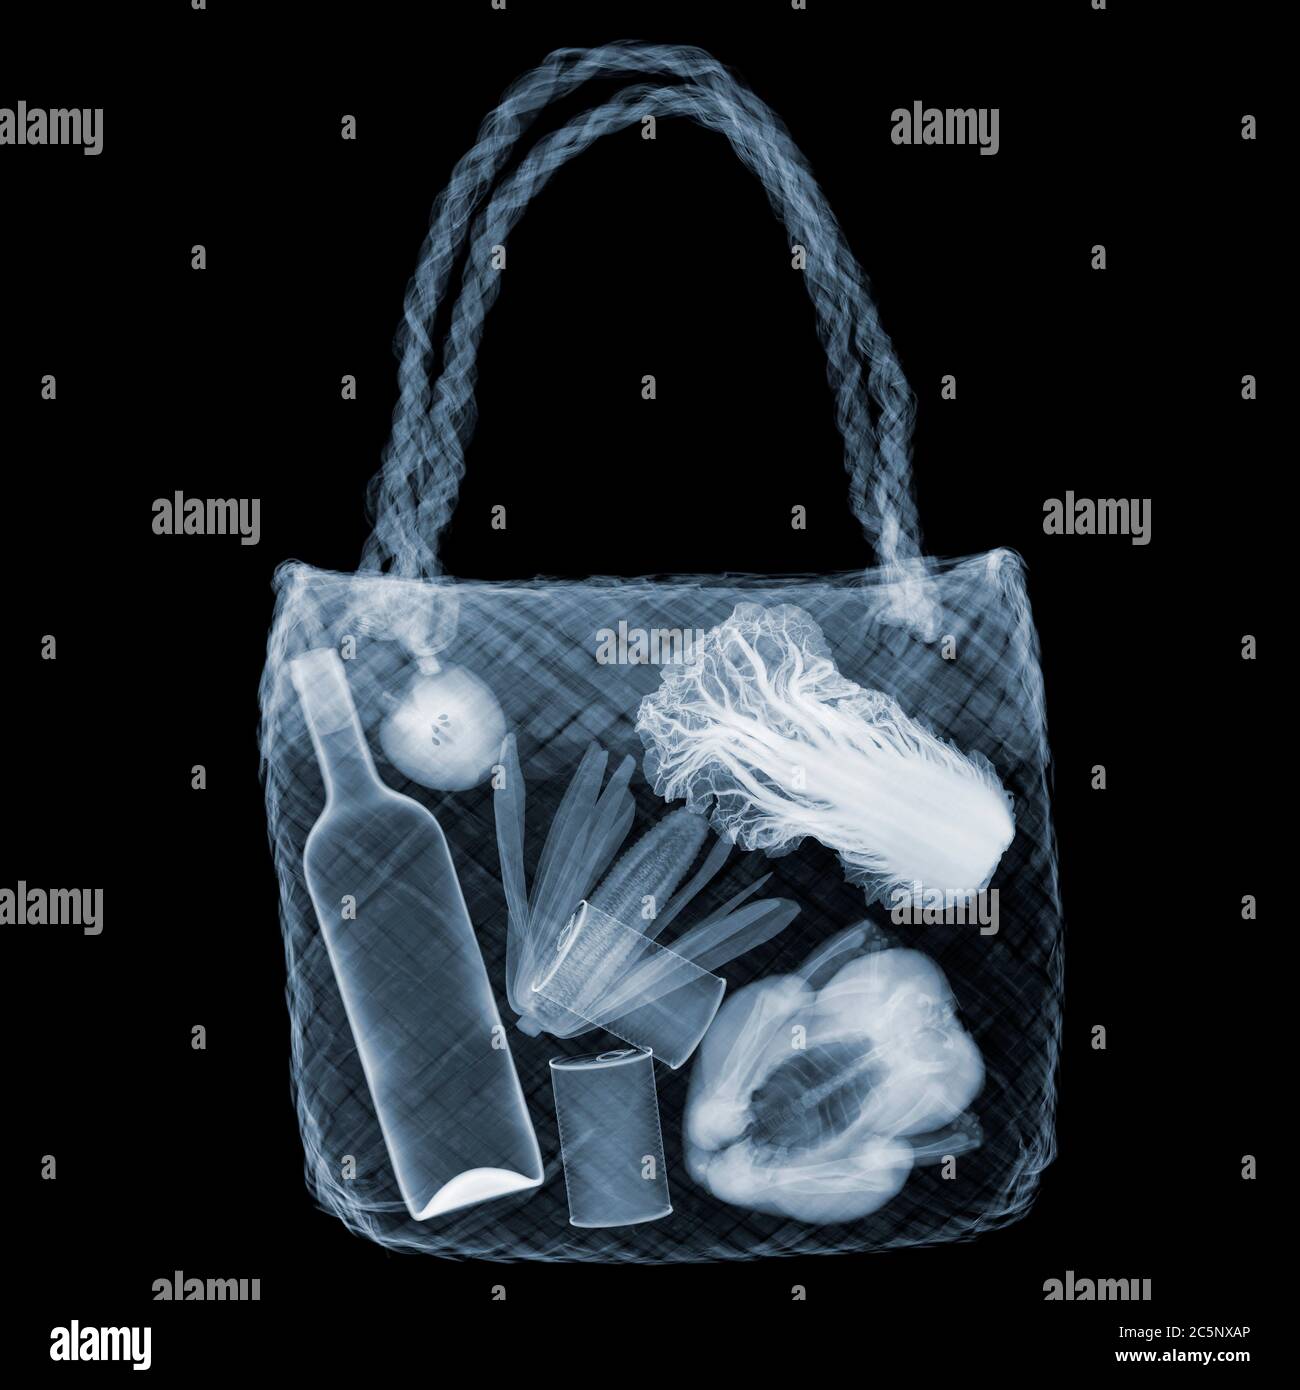 Straw bag with items, X-ray. Stock Photo